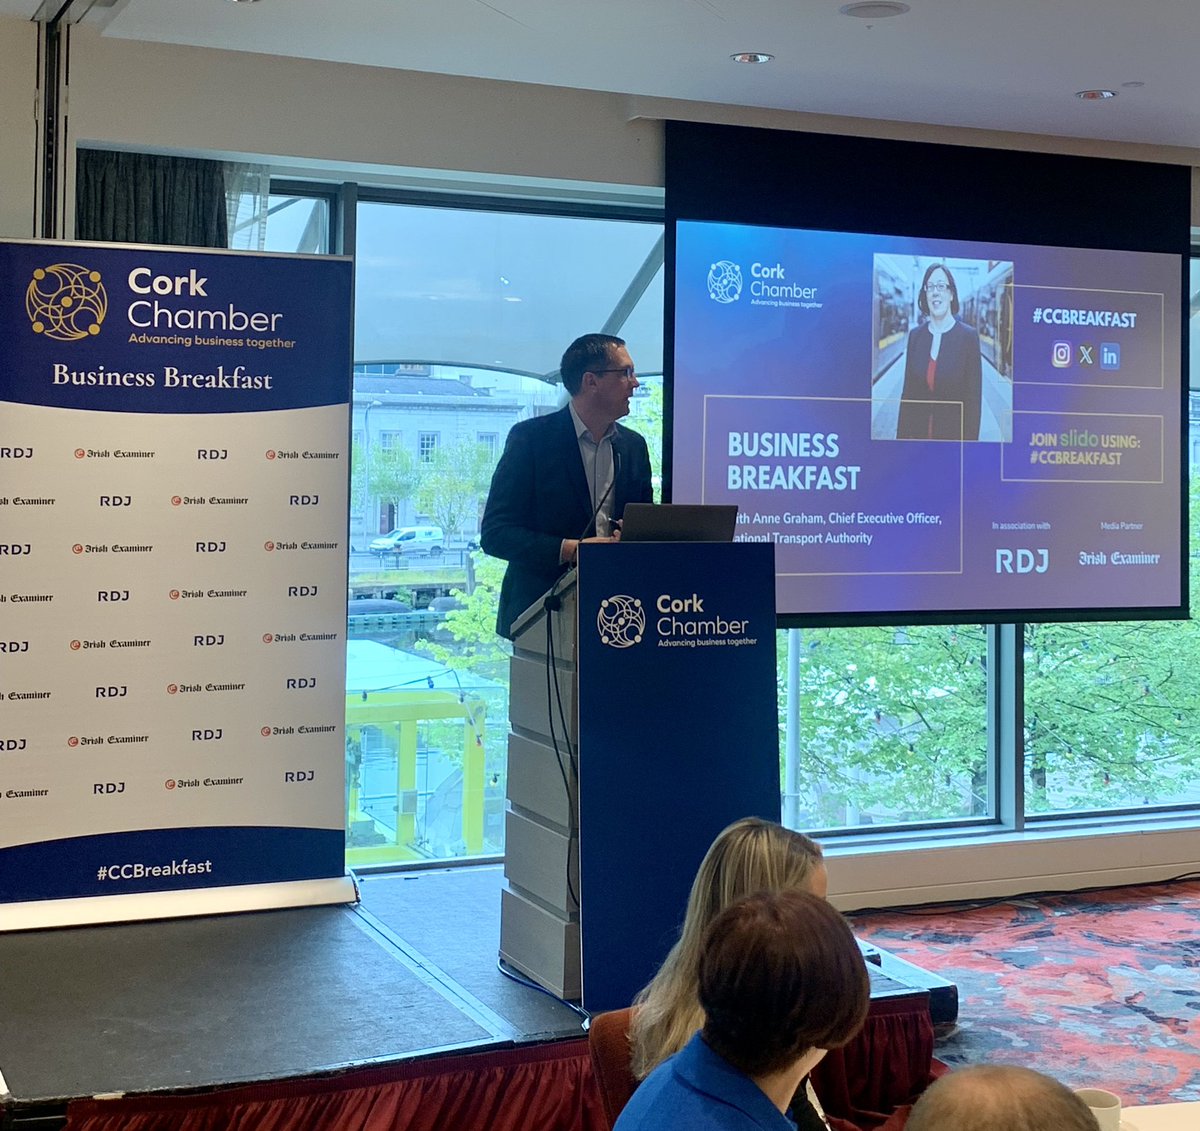 CEO of Cork Chamber, Conor Healy welcomes the crowd at the #CCBreakfast and introduces this morning’s member soapboxes, a fantastic opportunity for members to share their ‘elevator pitch’ in front of Cork’s business community. In association with @RDJ_LLP & @Irishexaminer